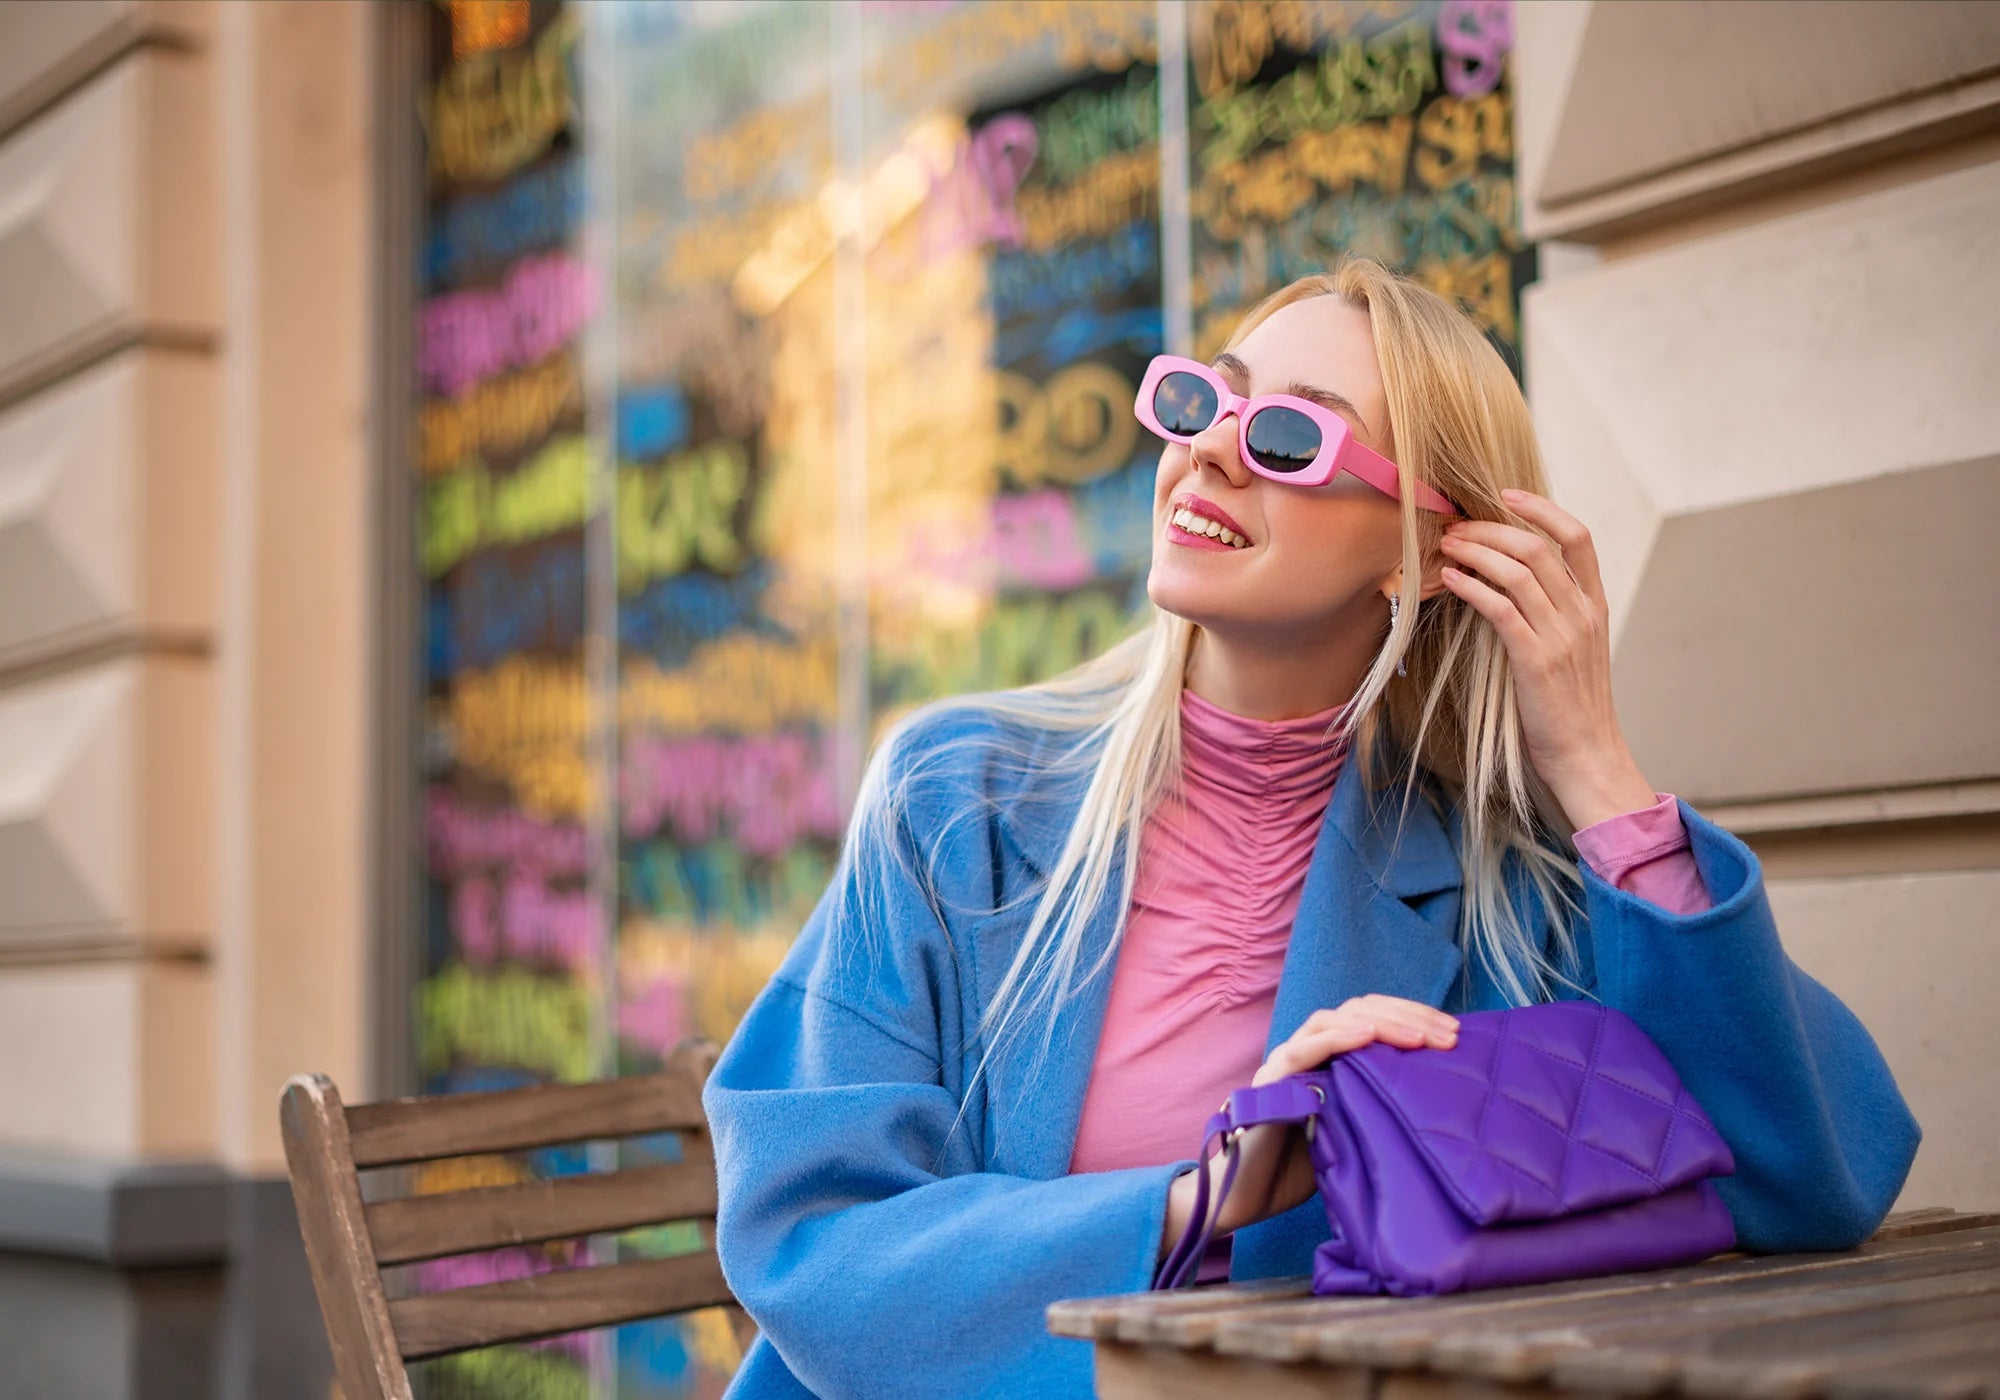 Fashionable woman wearing bright, colorful clothing, pink sunglasses, and a purple handbag | Be Bliss Boutique